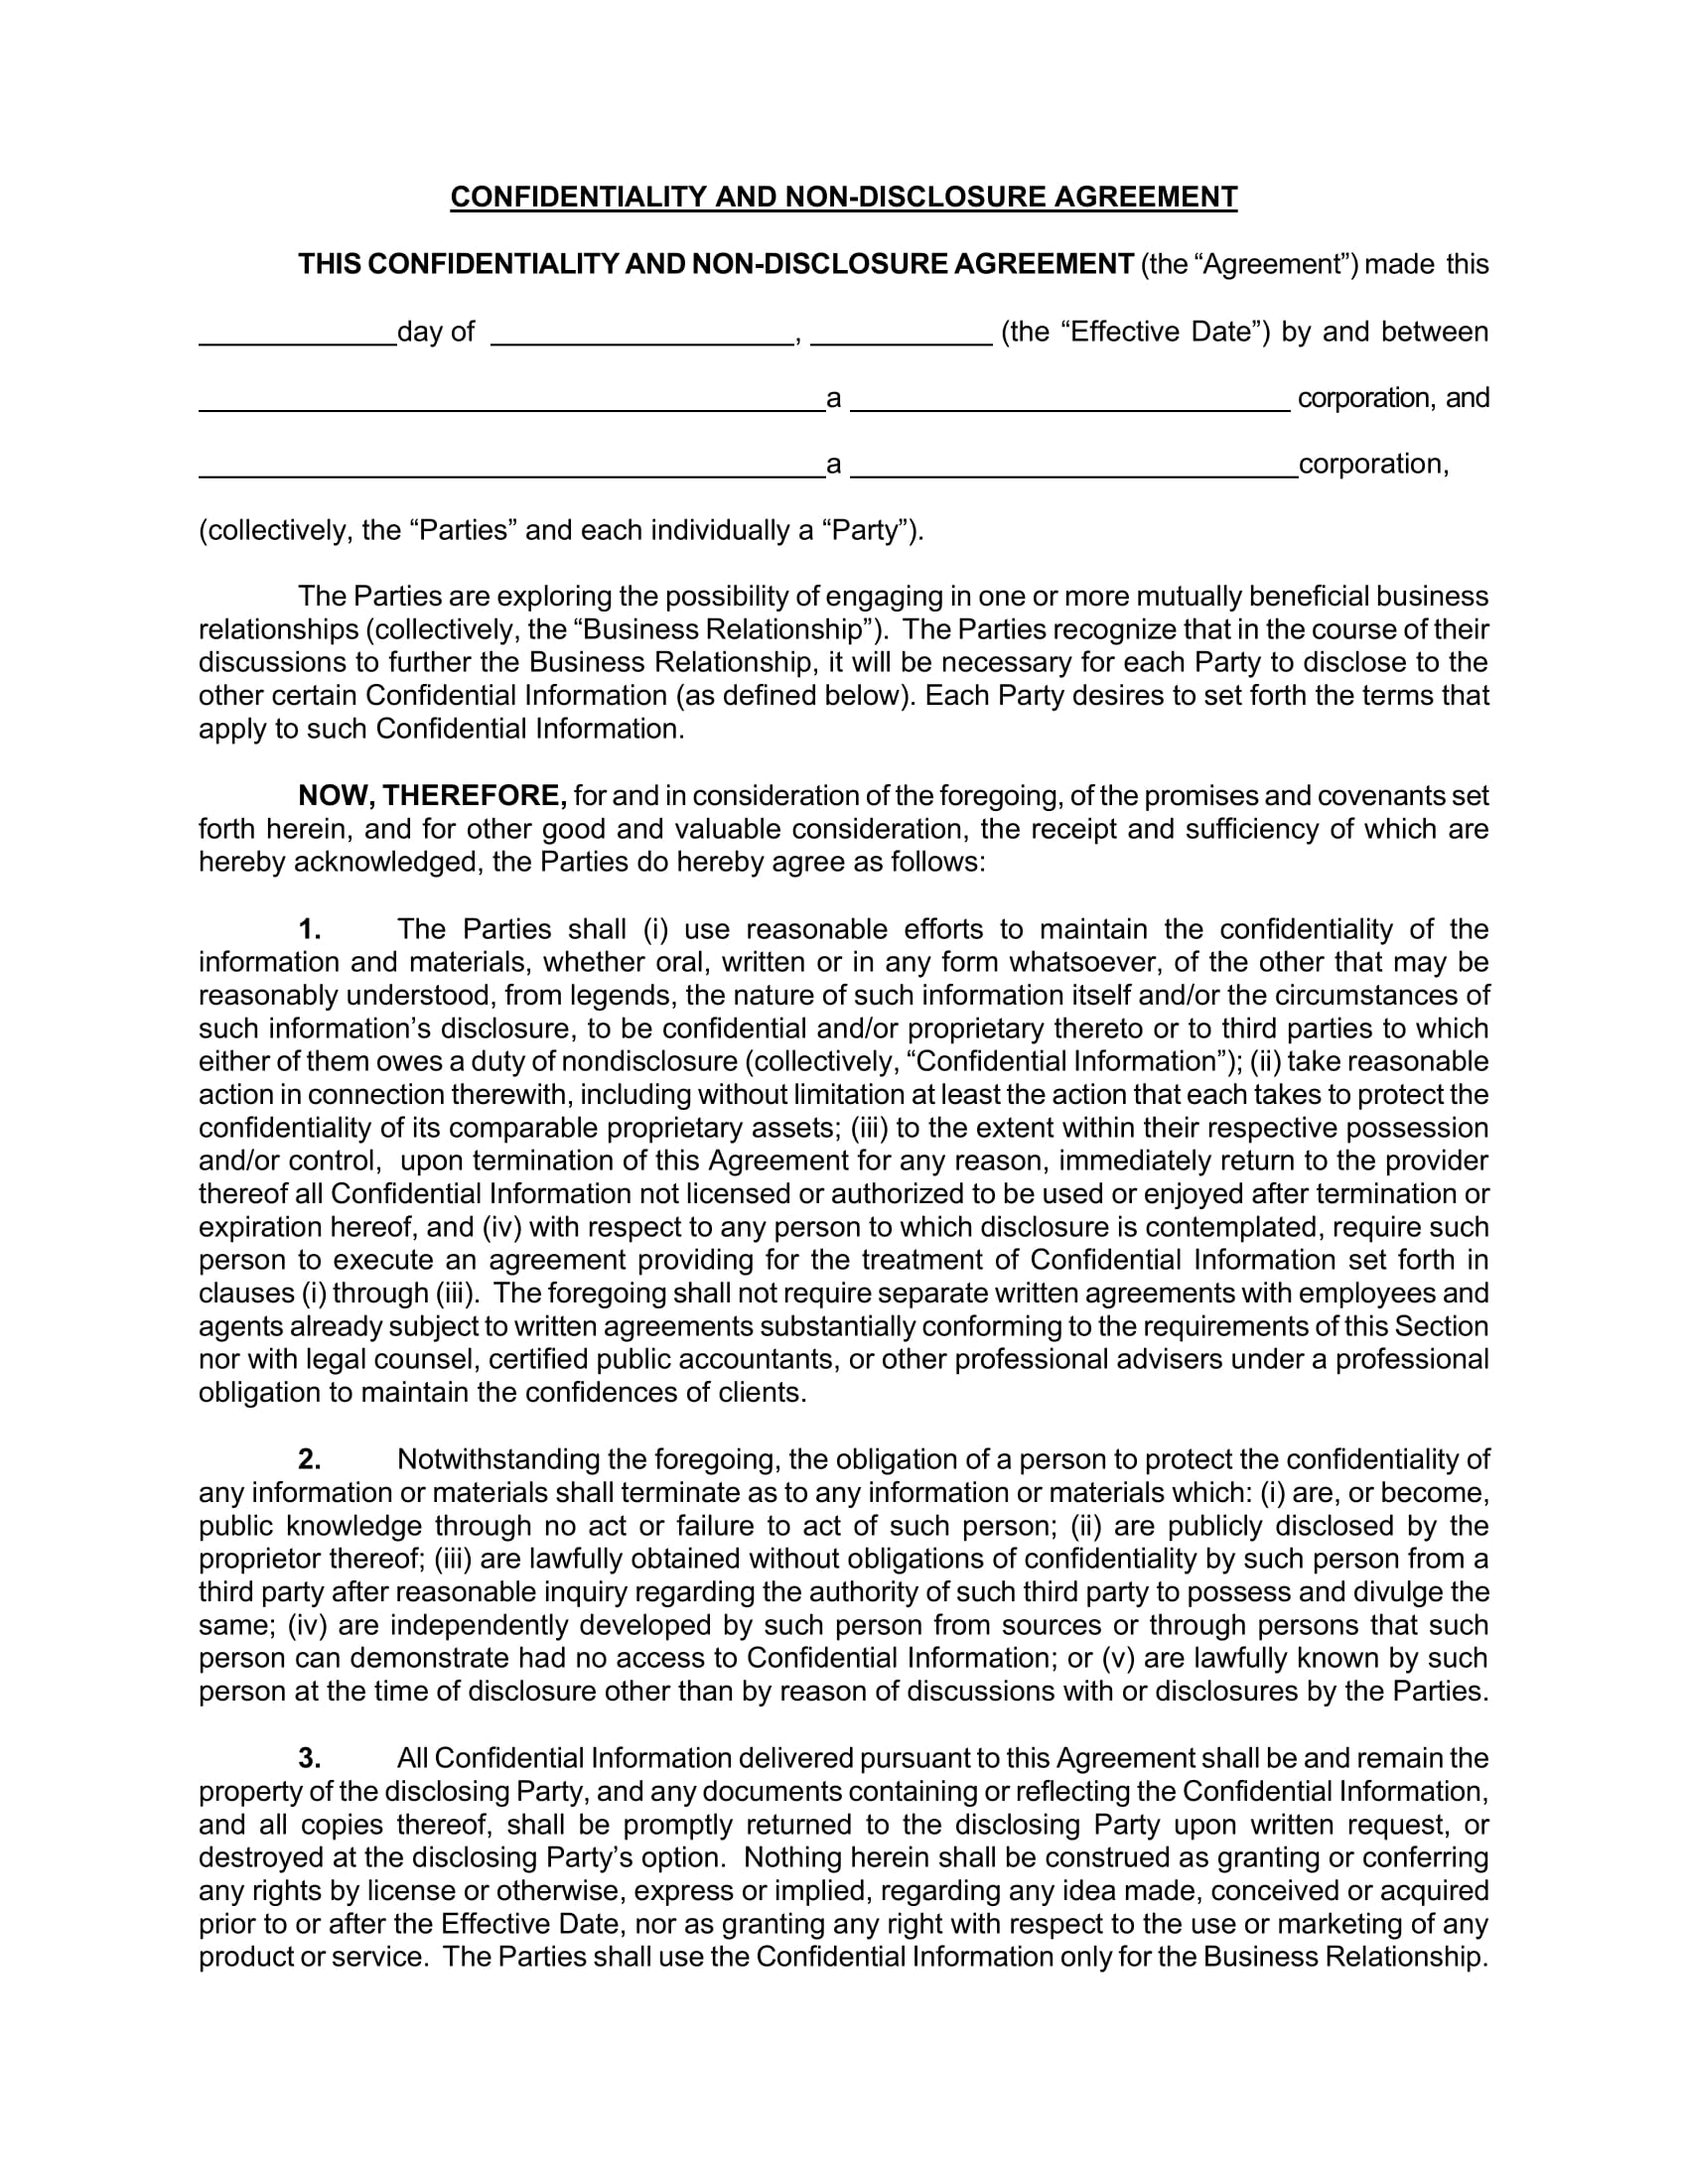 confidentiality and non disclosure agreement example 11